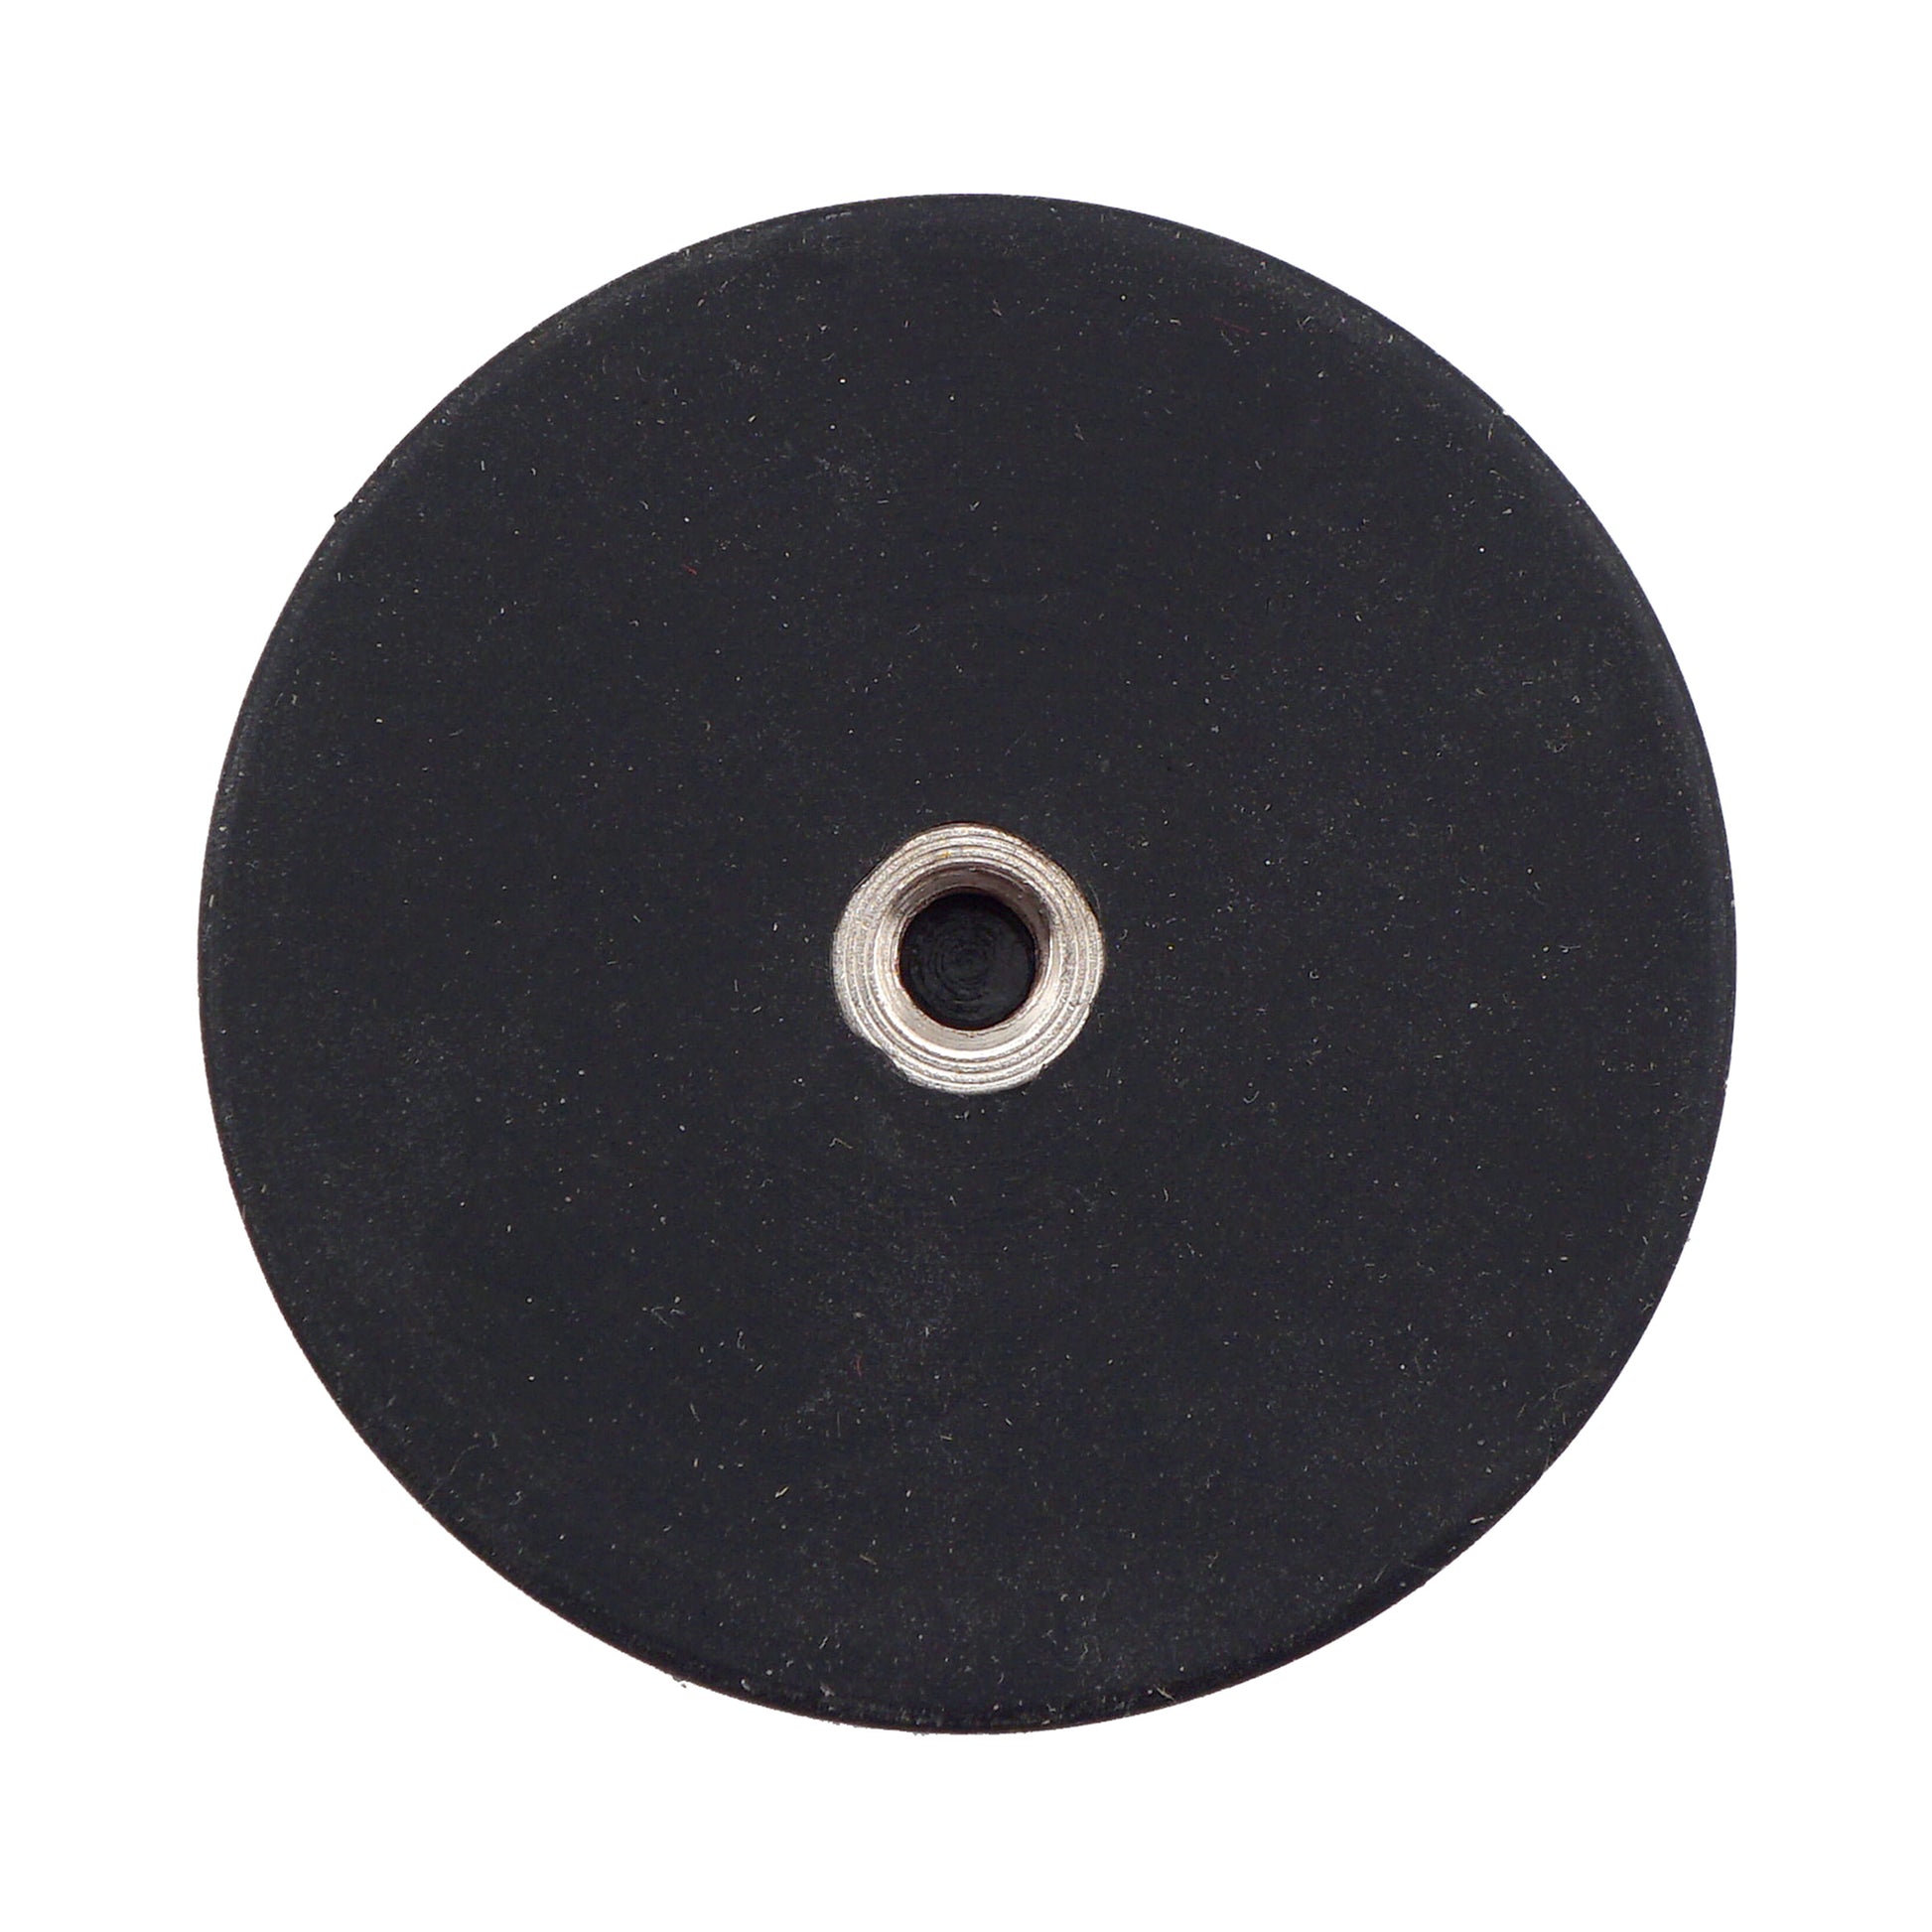 Load image into Gallery viewer, NADR169F Neodymium Rubber Coated Round Base Magnet with Female Thread - Bottom View